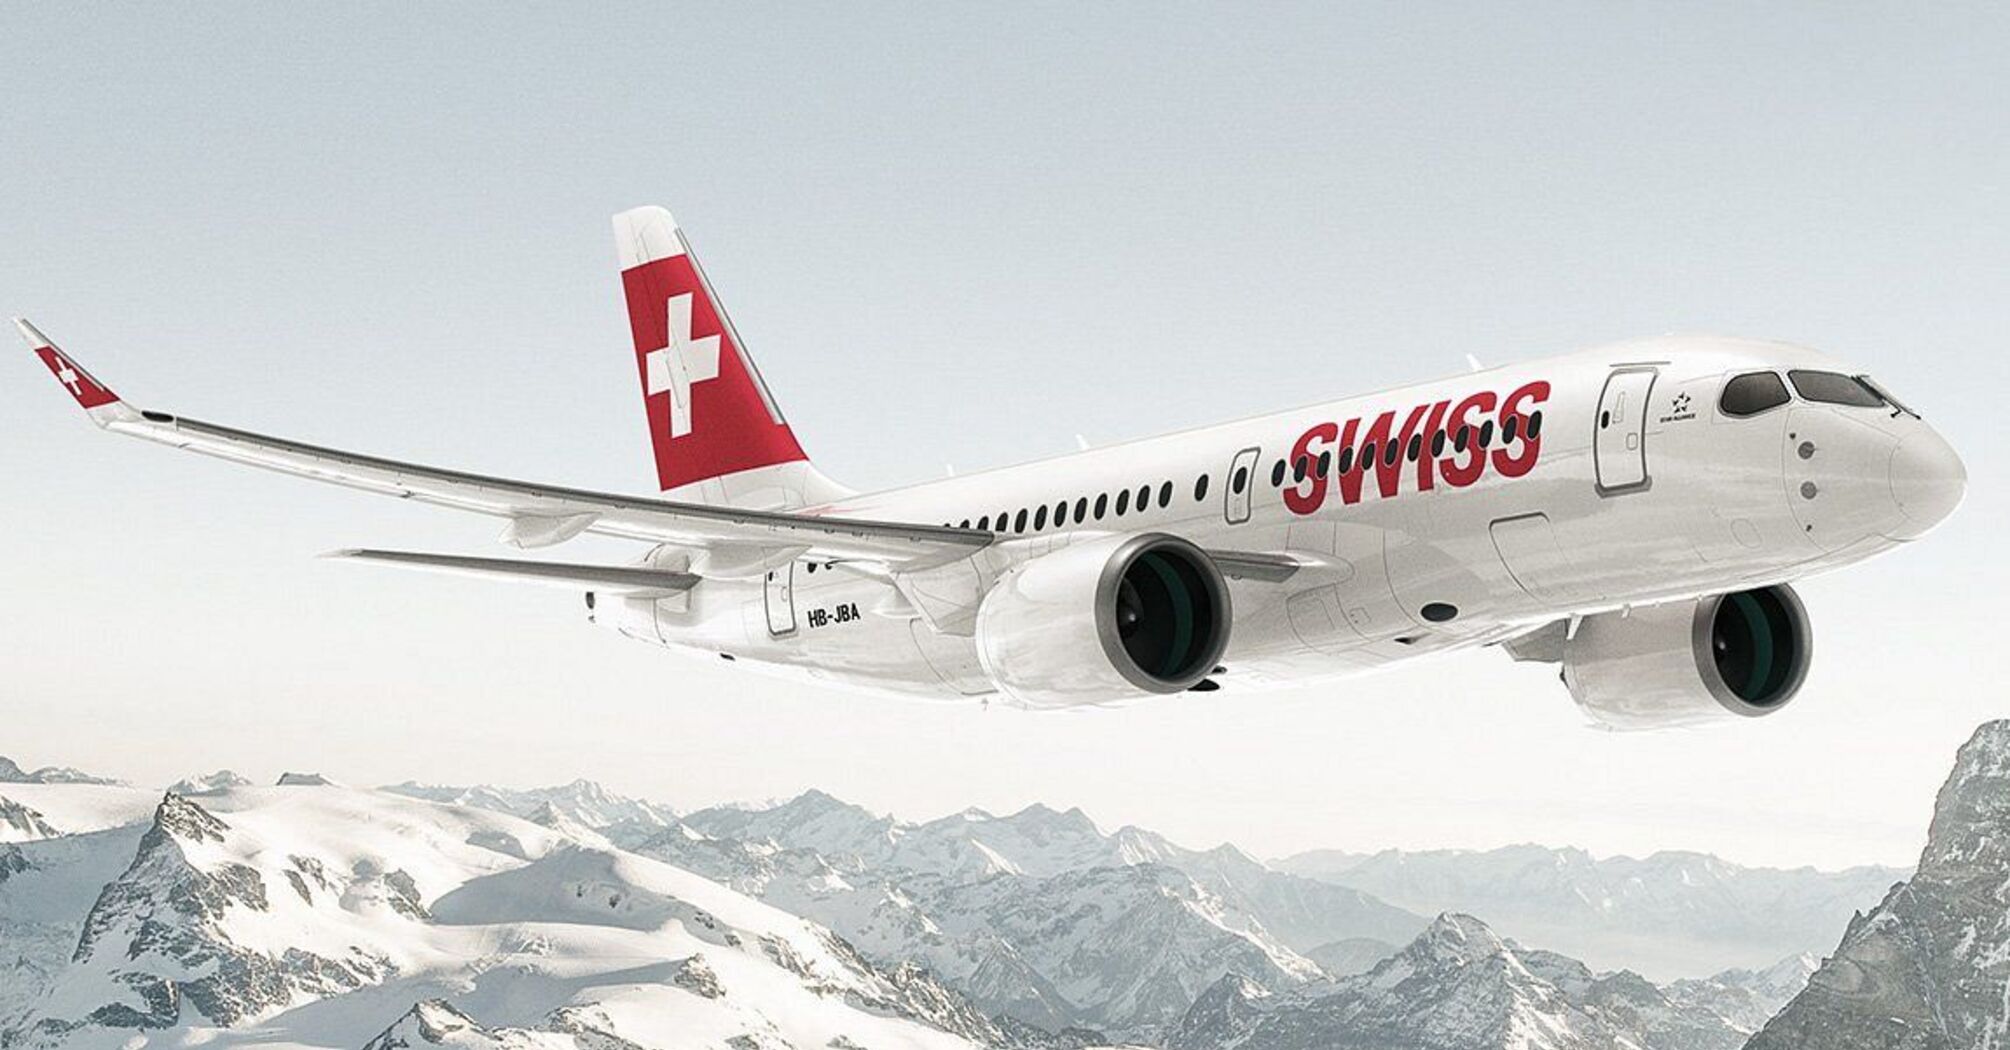 Swiss International Airlines Compensation for Delayed or Cancelled Flights